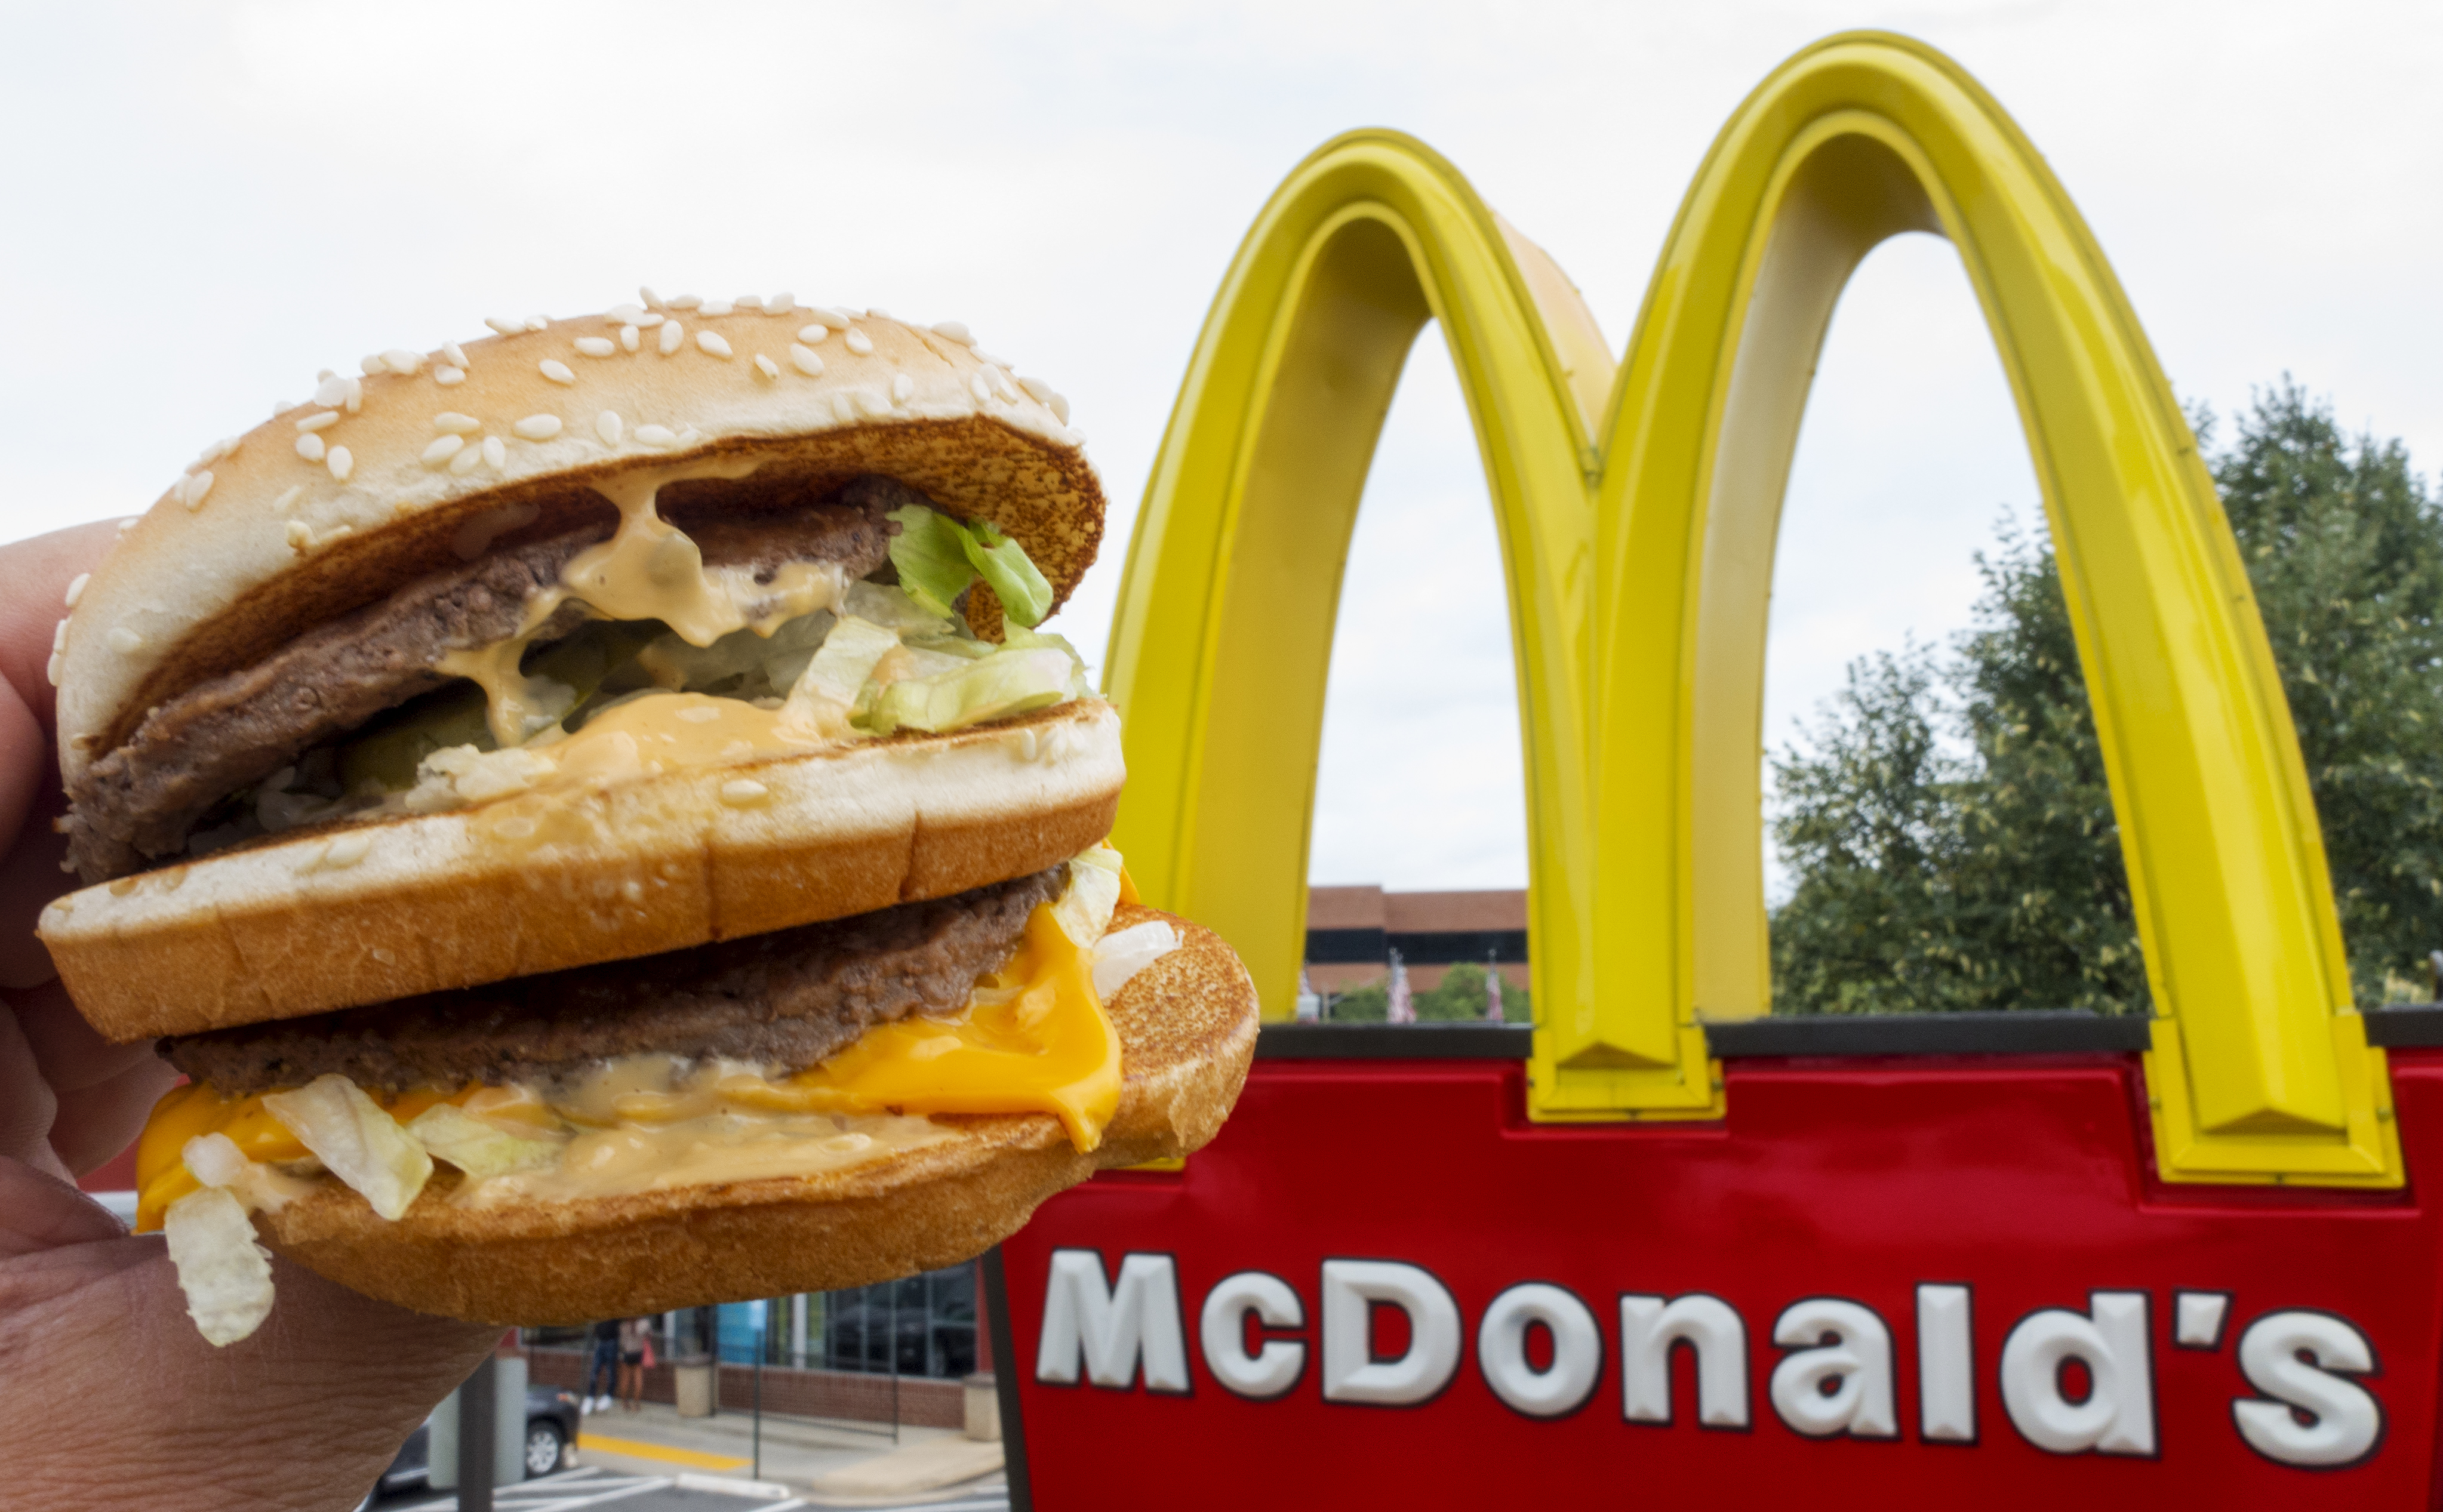 (FILES) This file photo taken on August 10, 2015 shows a McDonald's Big Mac held up near the golden arches at a McDonalds's in Centreville, Virginia.      McDonald's said December 8, 2016 it will shift its fiscal headquarters for the majority of non-US operations to Britain following an EU crackdown on the fast-food giant's tax benefits from Luxembourg. McDonald's is establishing a new Britain-based holding company to cover royalties from most licensing agreements outside the United States. The profits will be subject to British corporate taxes, McDonald's said.  / AFP PHOTO / PAUL J. RICHARDS